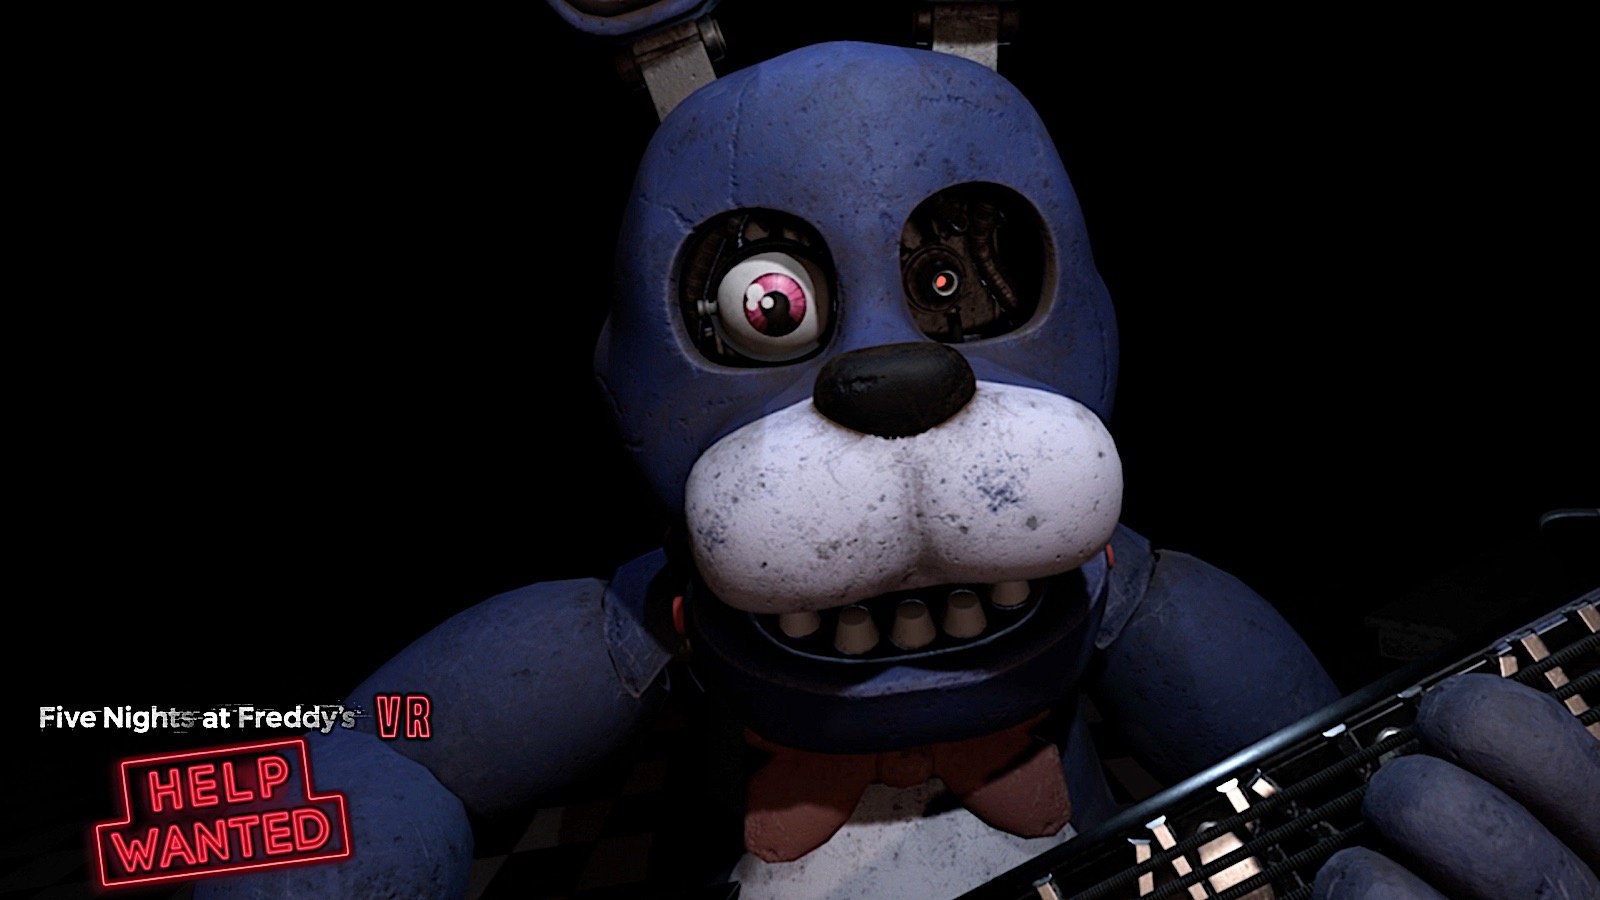 five nights at freddy's ps4 release date